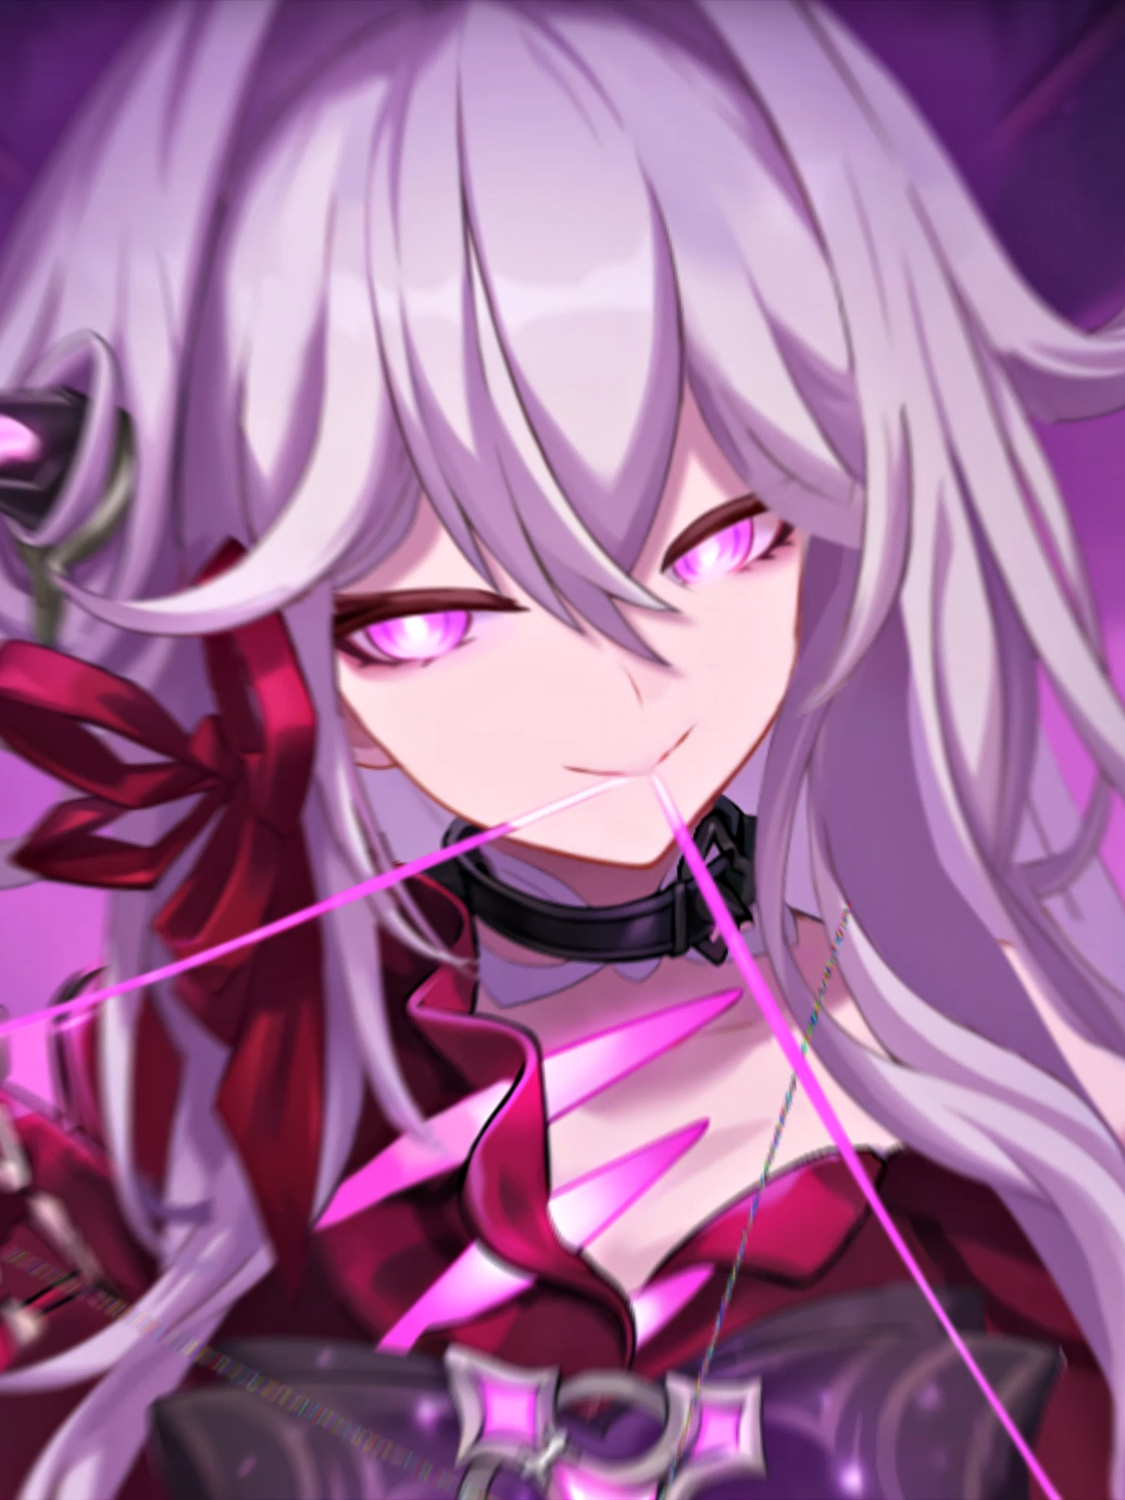 Kudos to Captain @raidensbaal for the edit! #honkaiimpact3rd #Thelema #崩壊3rd #セルマ #崩壊3rd公式 #honkaiimpact3rdedit #honkaiimpact3rdthelema